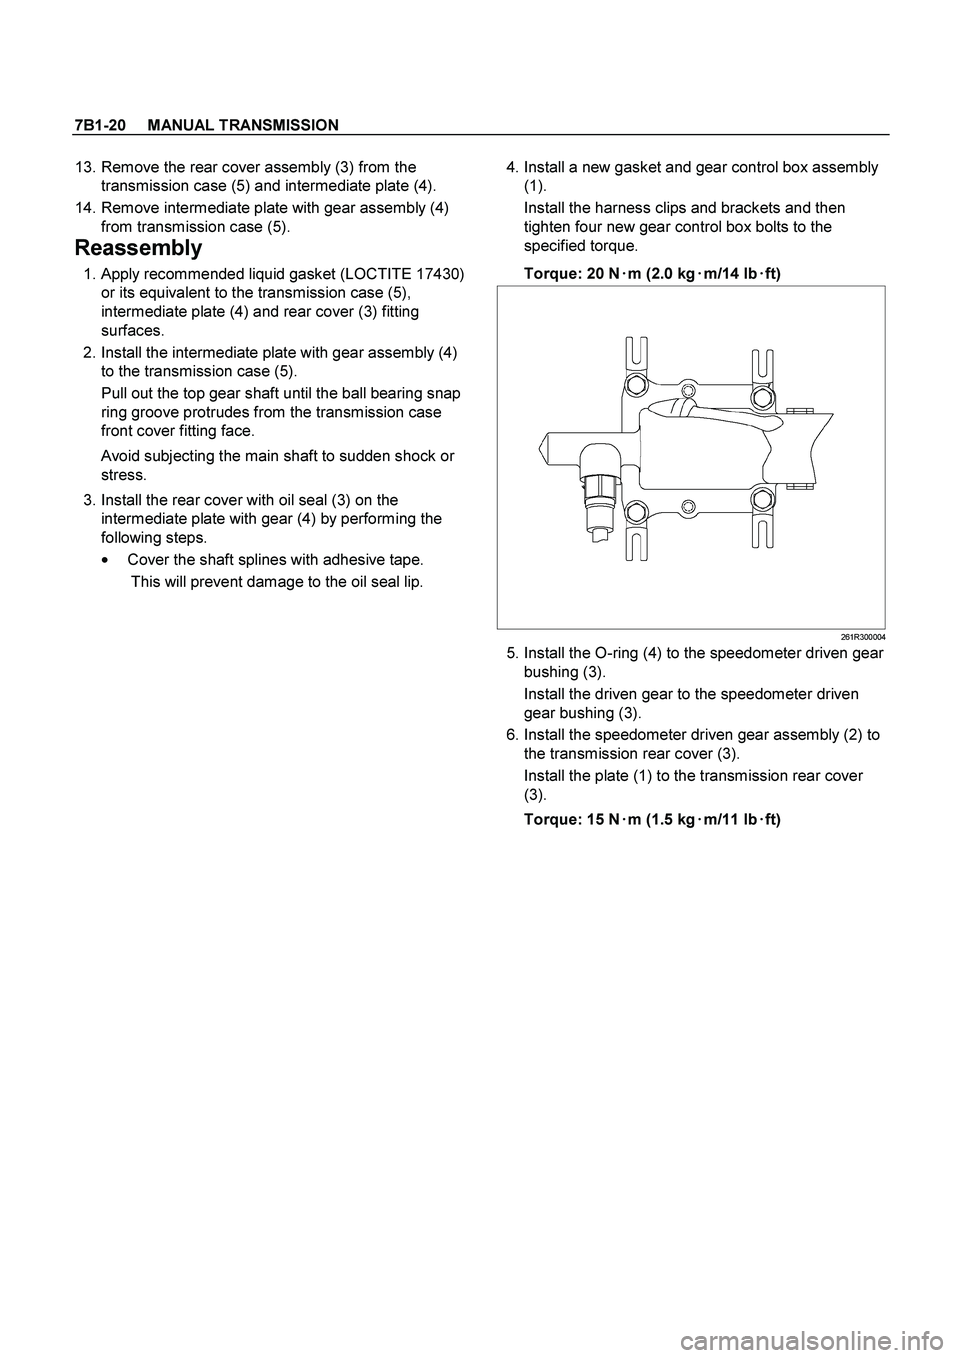 ISUZU TF SERIES 2004  Workshop Manual 7B1-20     MANUAL TRANSMISSION
 
 13. Remove the rear cover assembly (3) from the 
transmission case (5) and intermediate plate (4). 
 14. Remove intermediate plate with gear assembly (4) 
from transm